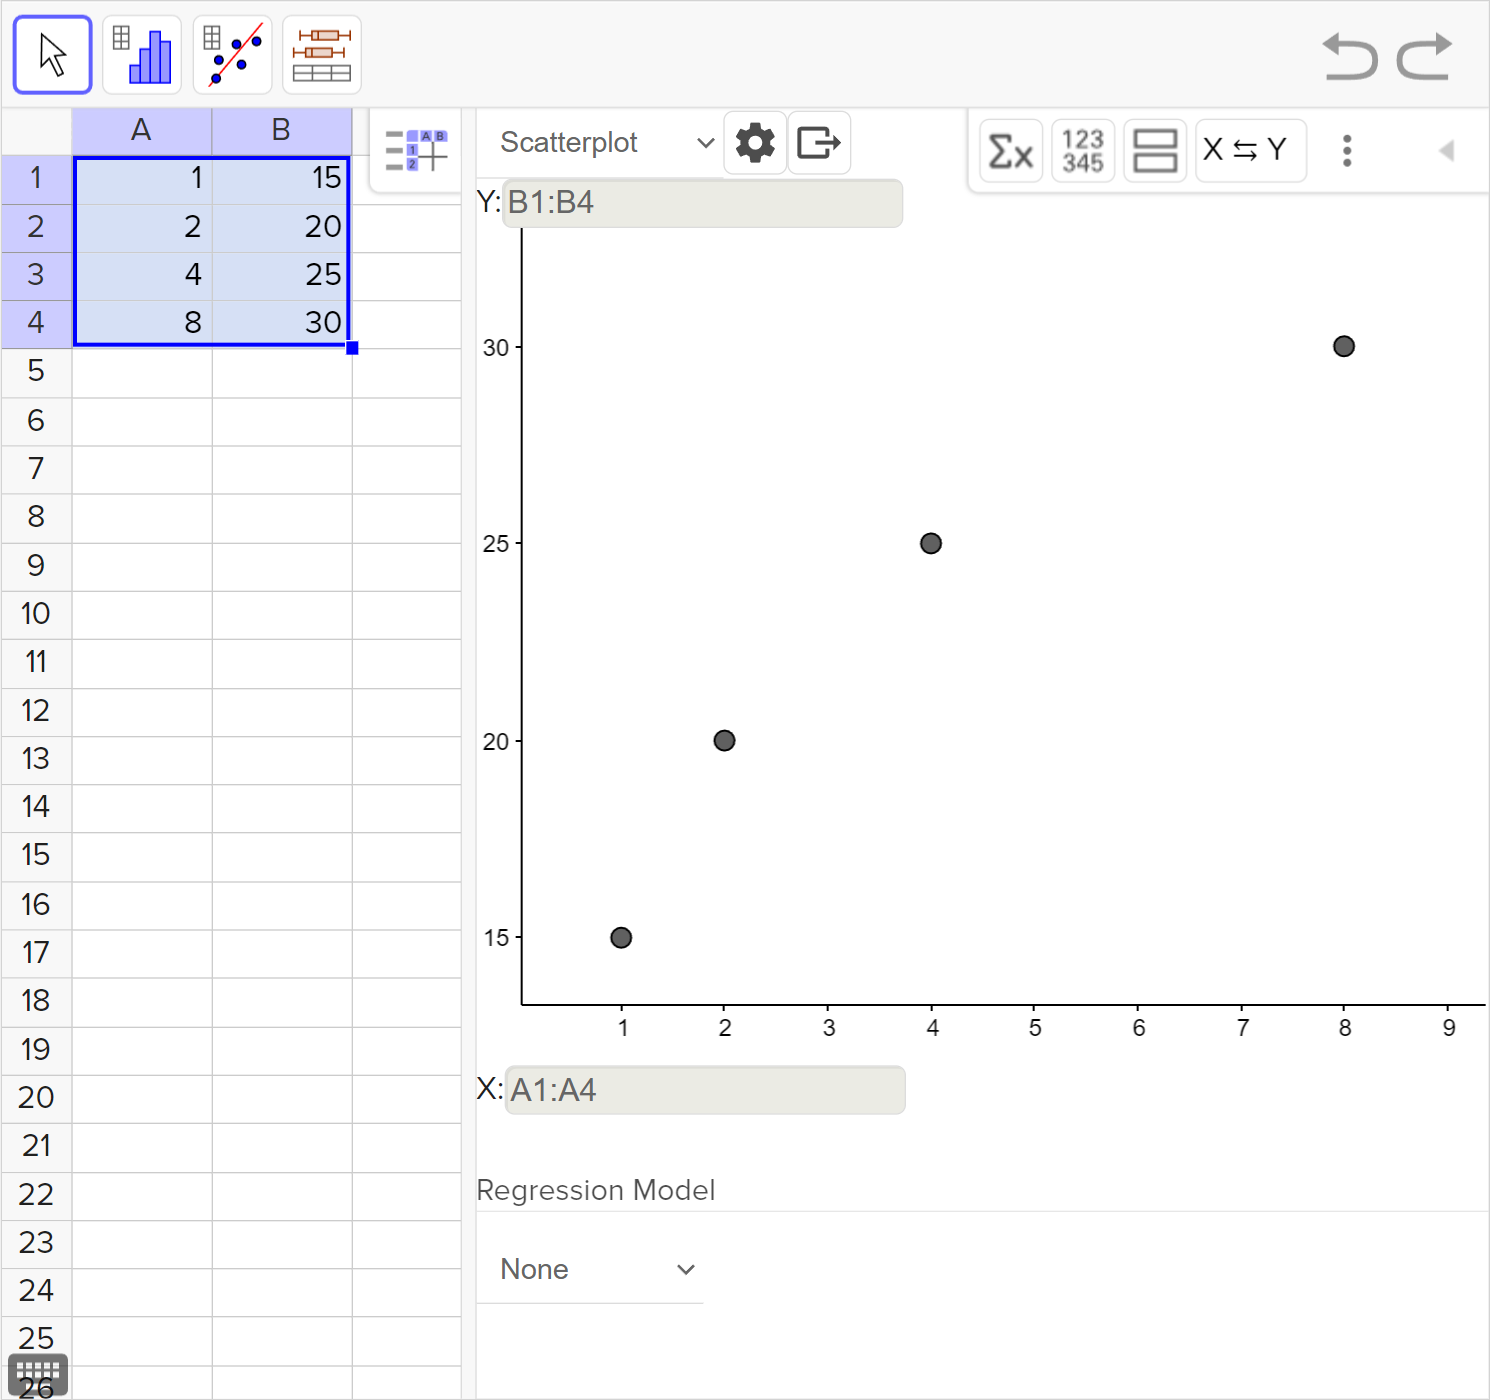 A screenshot of the GeoGebra statistics tool showing the following: On the left side: the numbers 1, 2, 4, and 8 entered in column A, rows 1 to 4, and 15, 20, 25, and 30 entered in column B, rows 1 to 4. The cells from column A, rows 1 to 4, and column B, rows 1 to 4, are selected. On the right side: a scatterplot is shown. Speak to your teacher for more details.